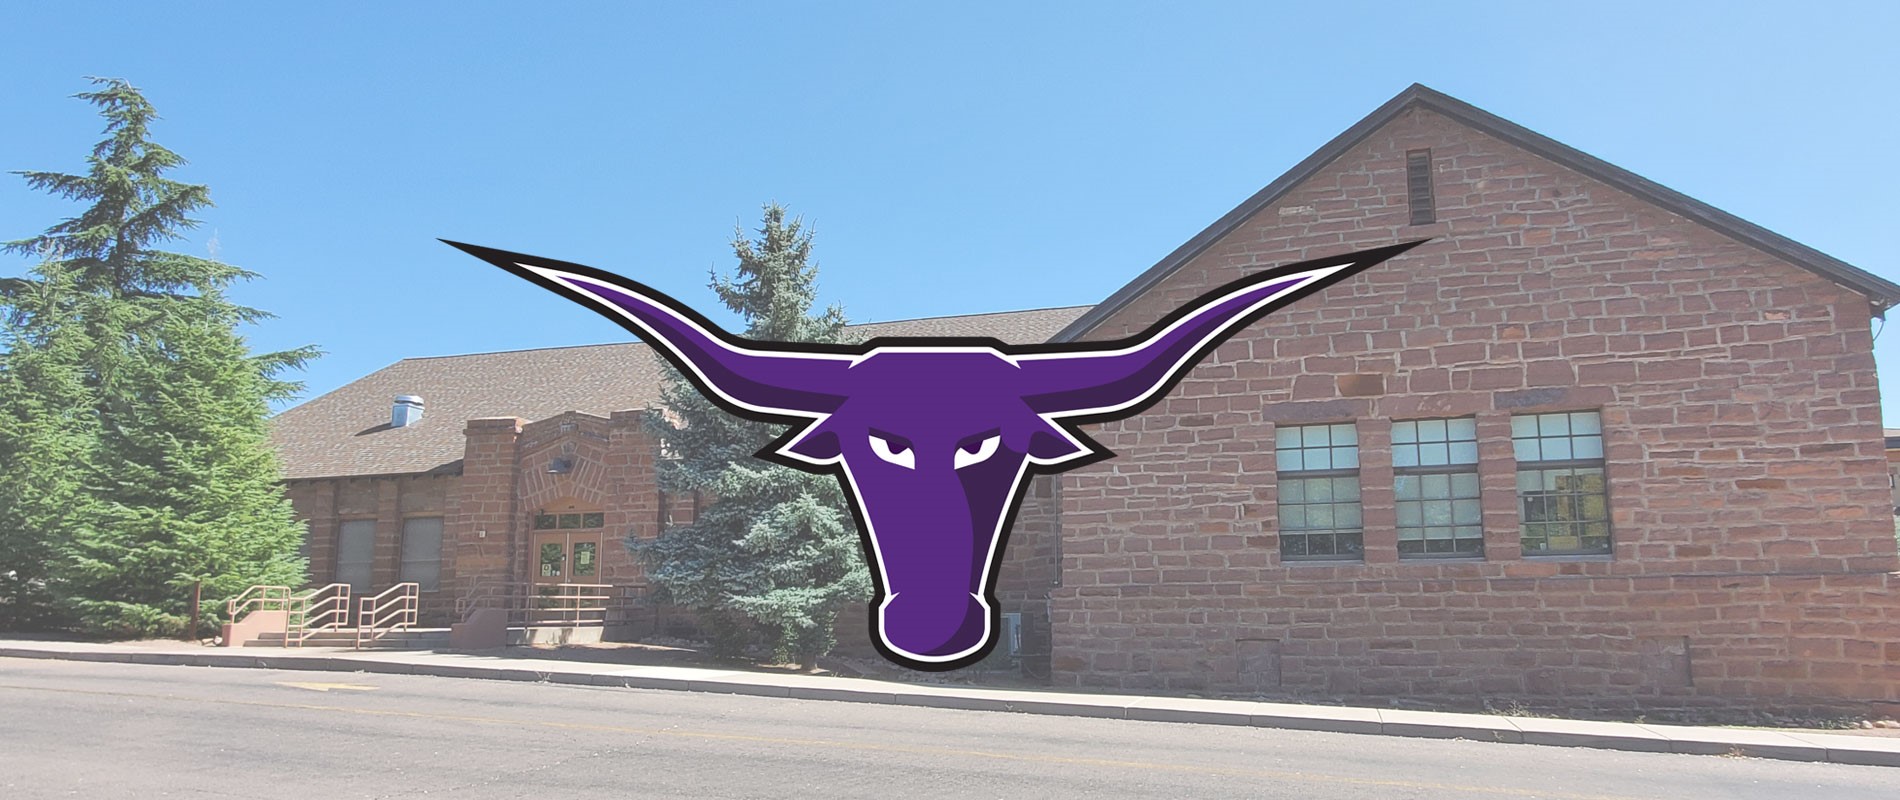 District building with longhorn logo